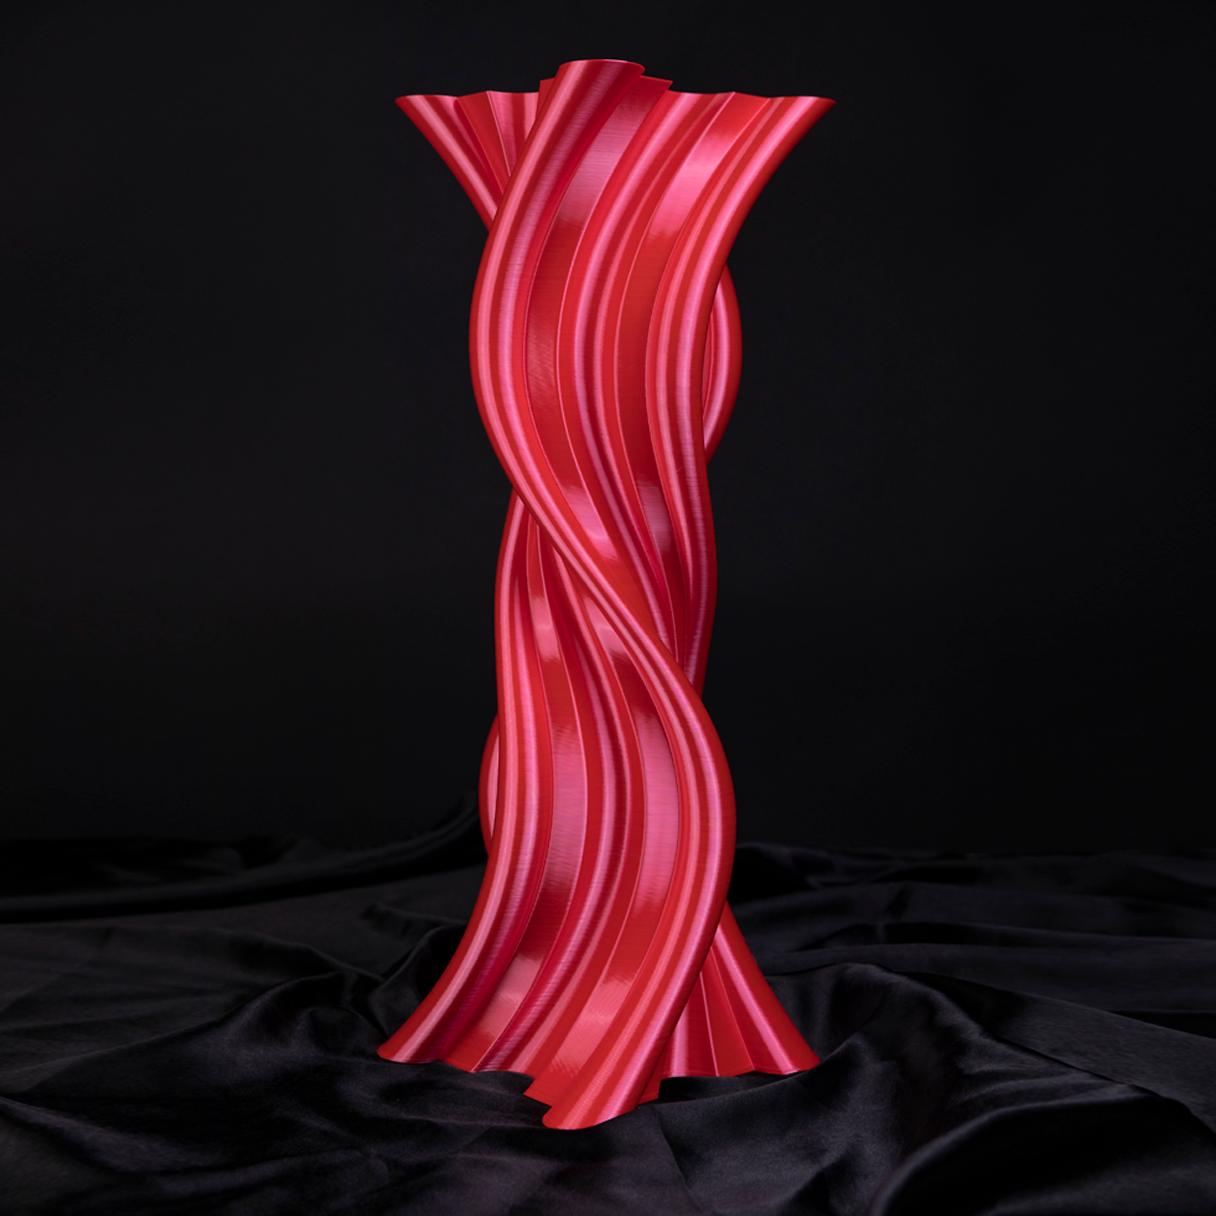 Post-Modern Tersicore, Red Contemporary Sustainable Vase-Sculpture